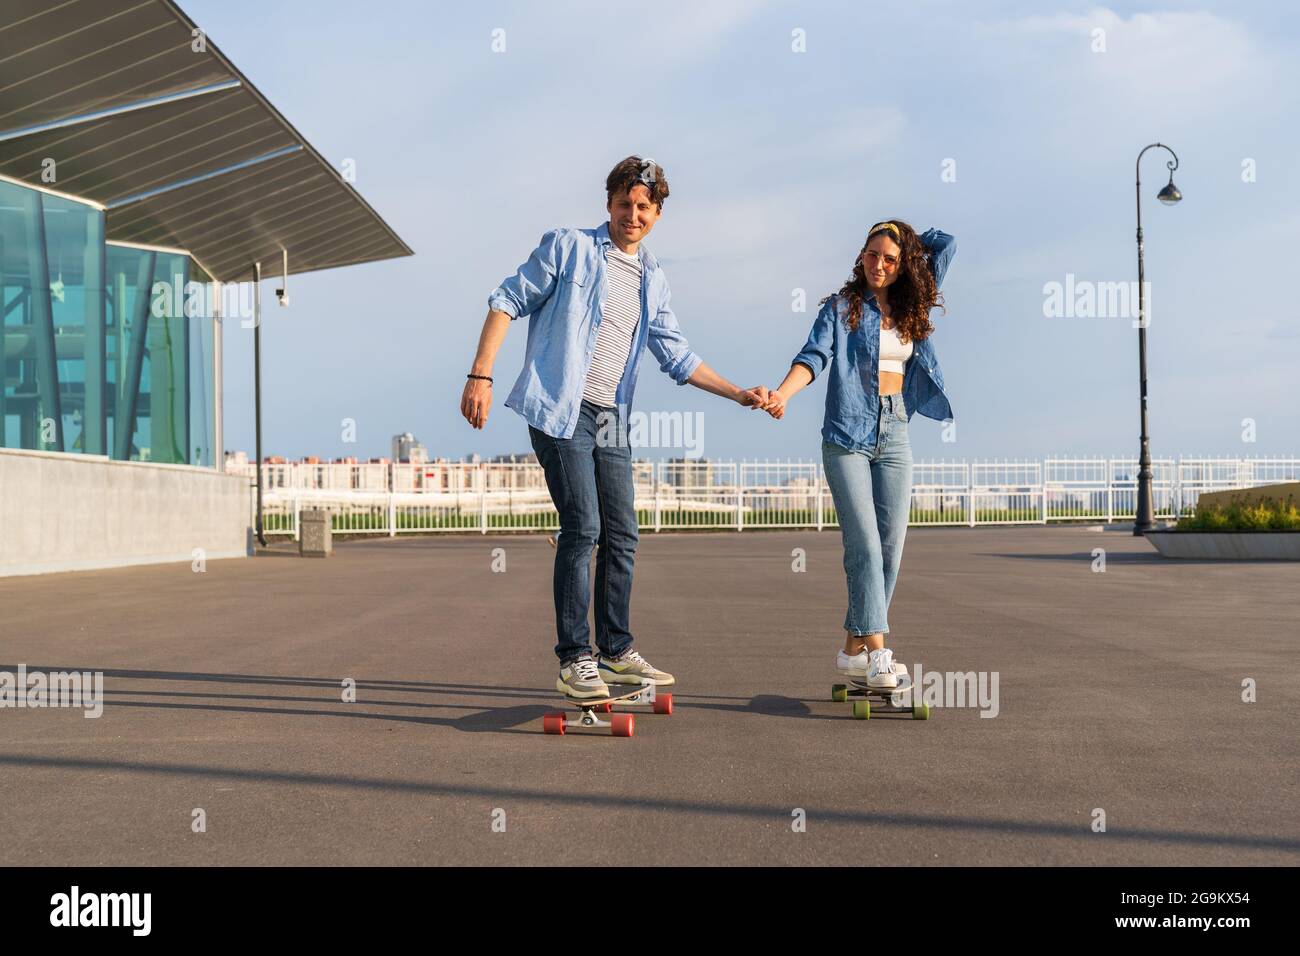 Young adult riding longboard on summer city street. Hipsters couple on  skateboards in urban area Stock Photo - Alamy